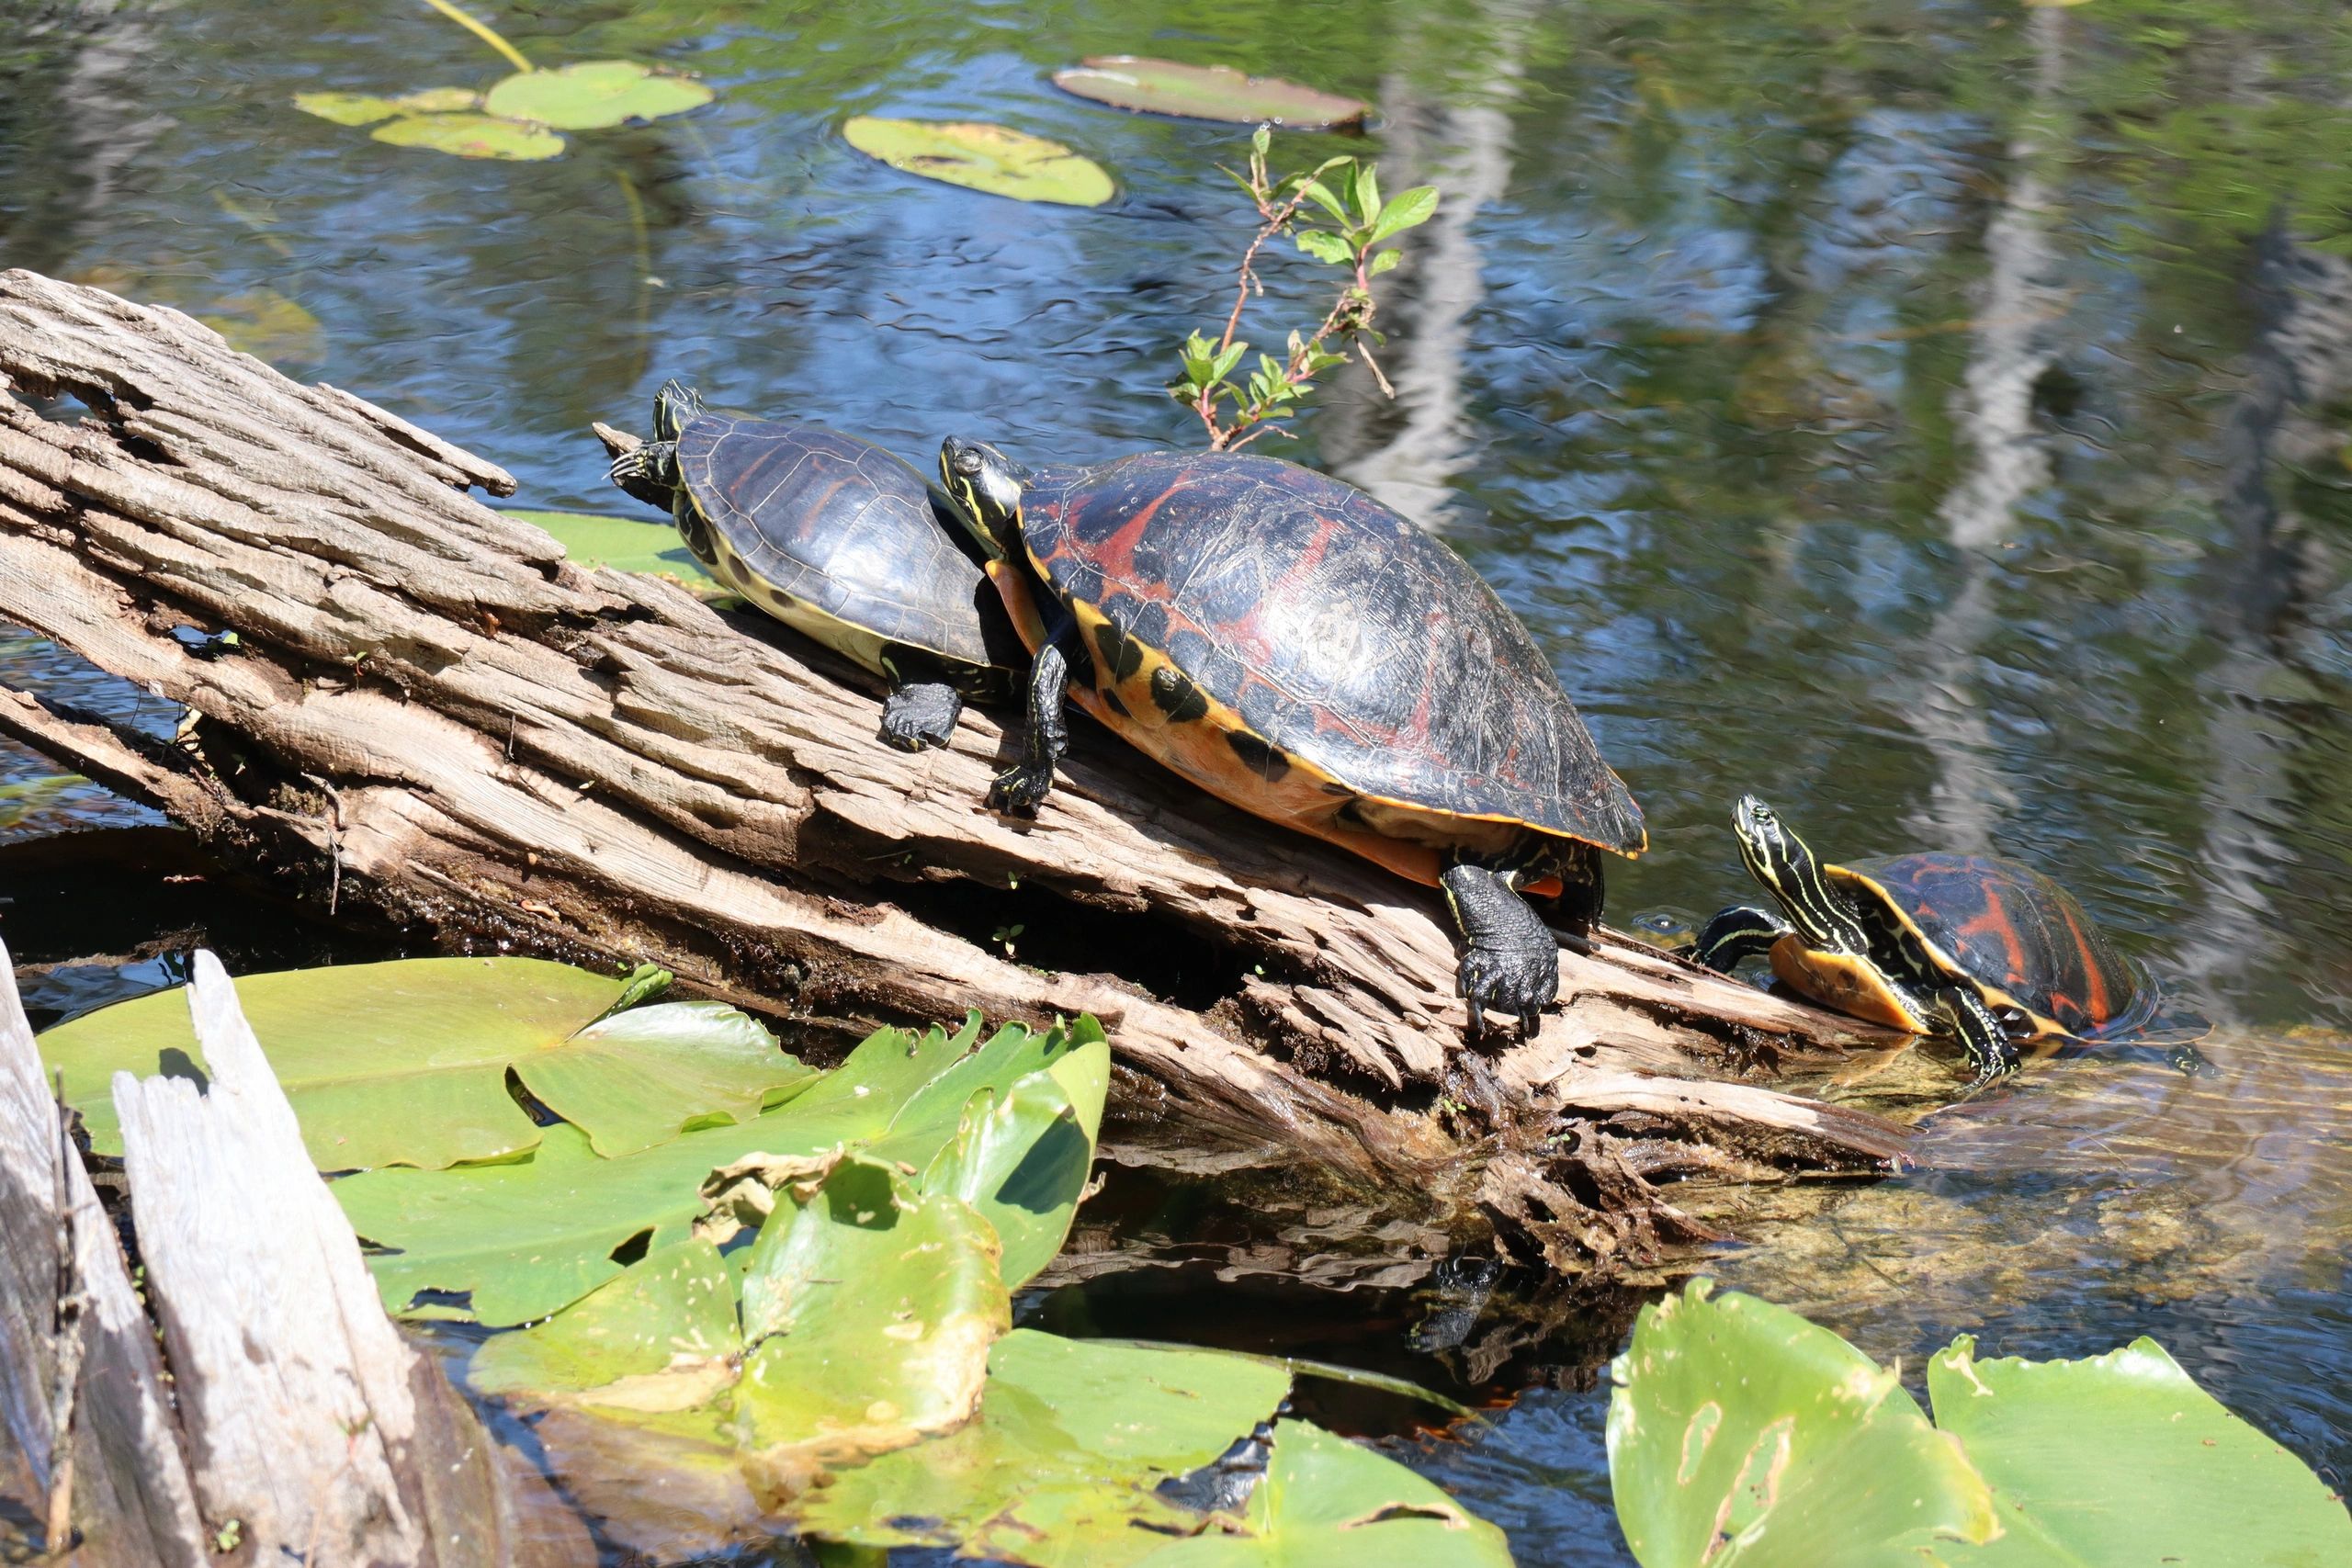 Southwest Florida Wildlife Photos - Three Red-bellied Cooter Turtles, Six-Mile Cypress Slough 